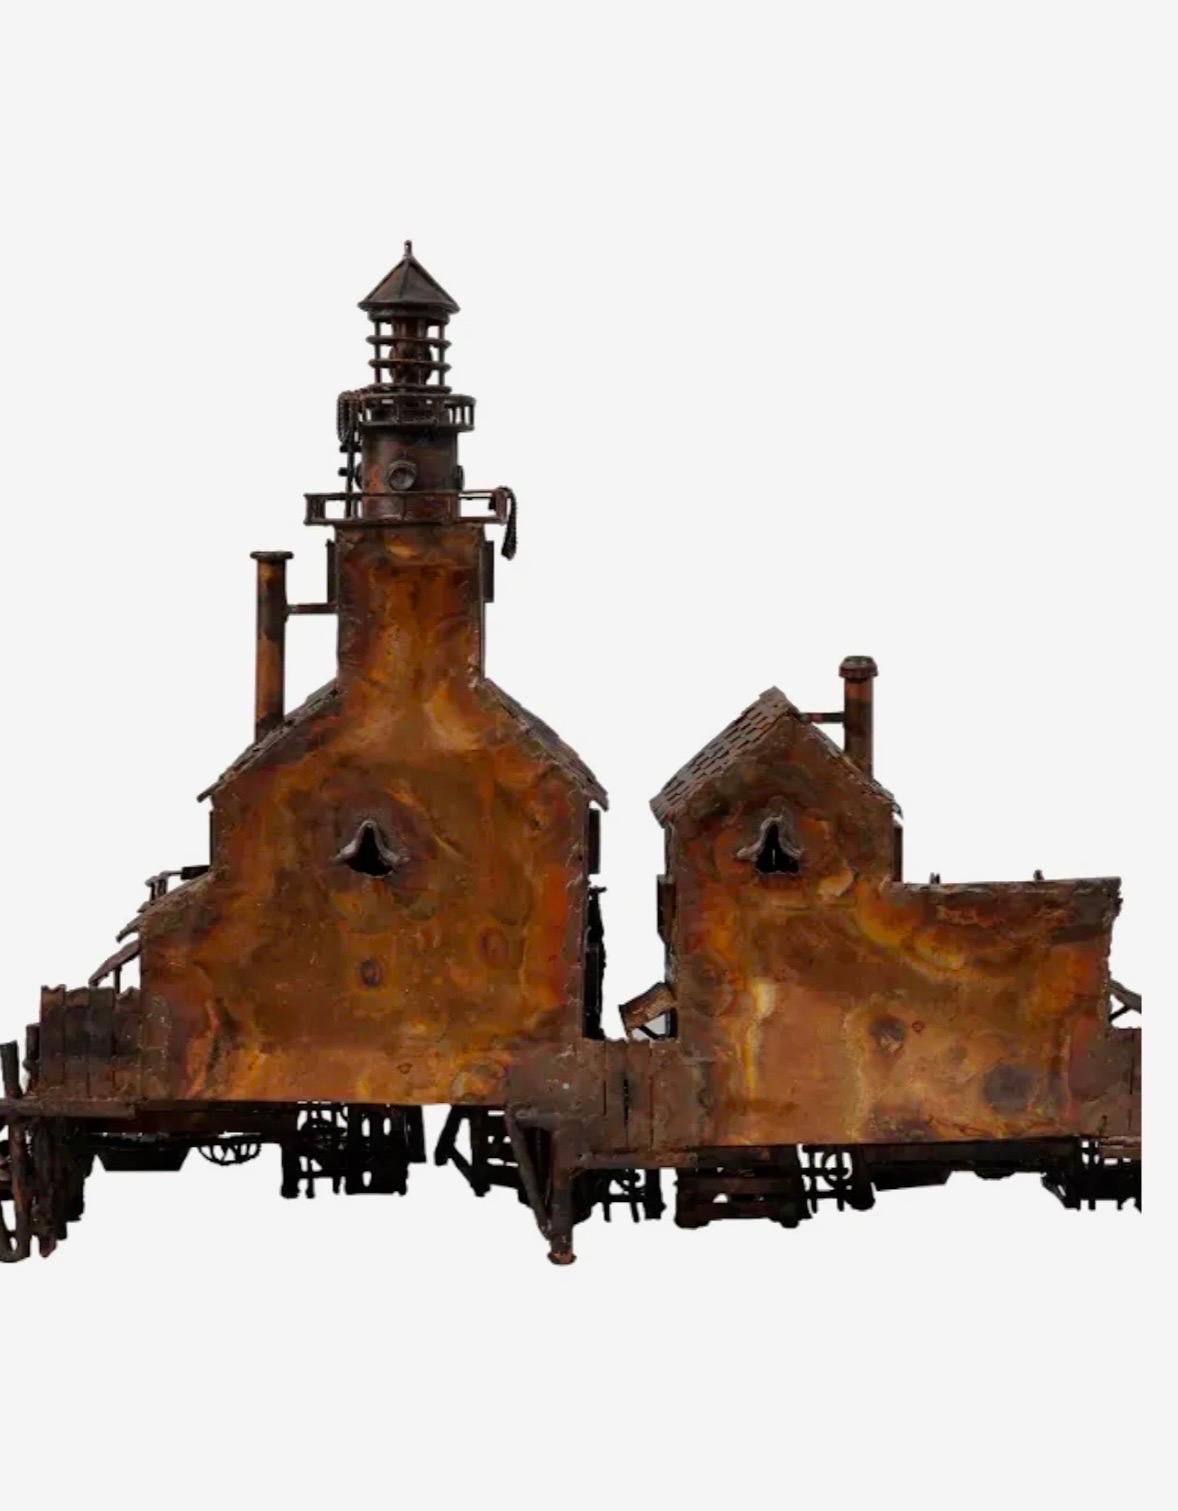 A vintage American folk art hand made sculpture architectural model of fishermen's village house and lighthouse tower. 
Made of copper with many unique parts (sailboat paddles, doors, windows, rope, small fishing boat dinghy, store sign, and